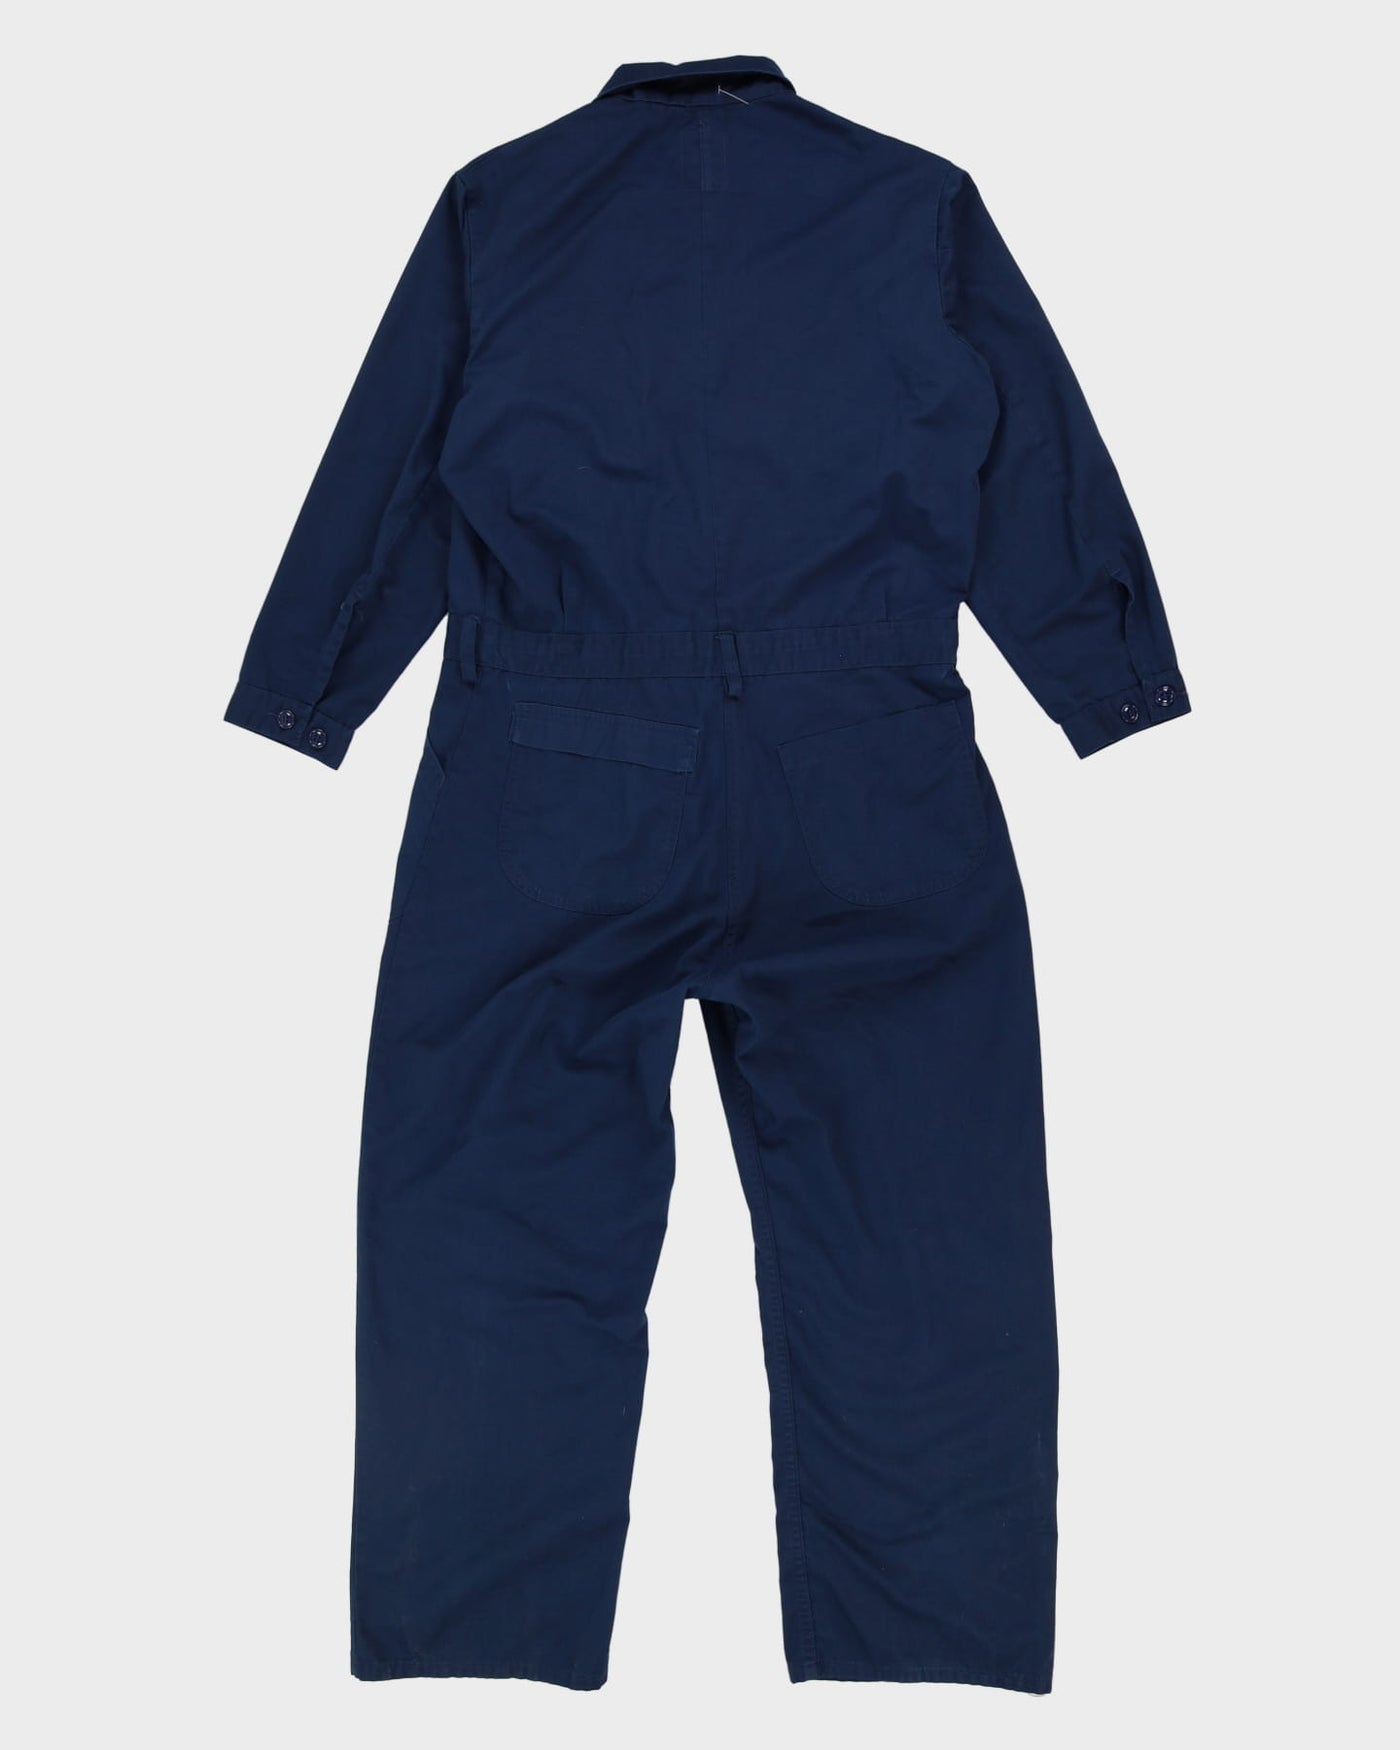 90s Vintage US Navy Blue Utility Coveralls - Large